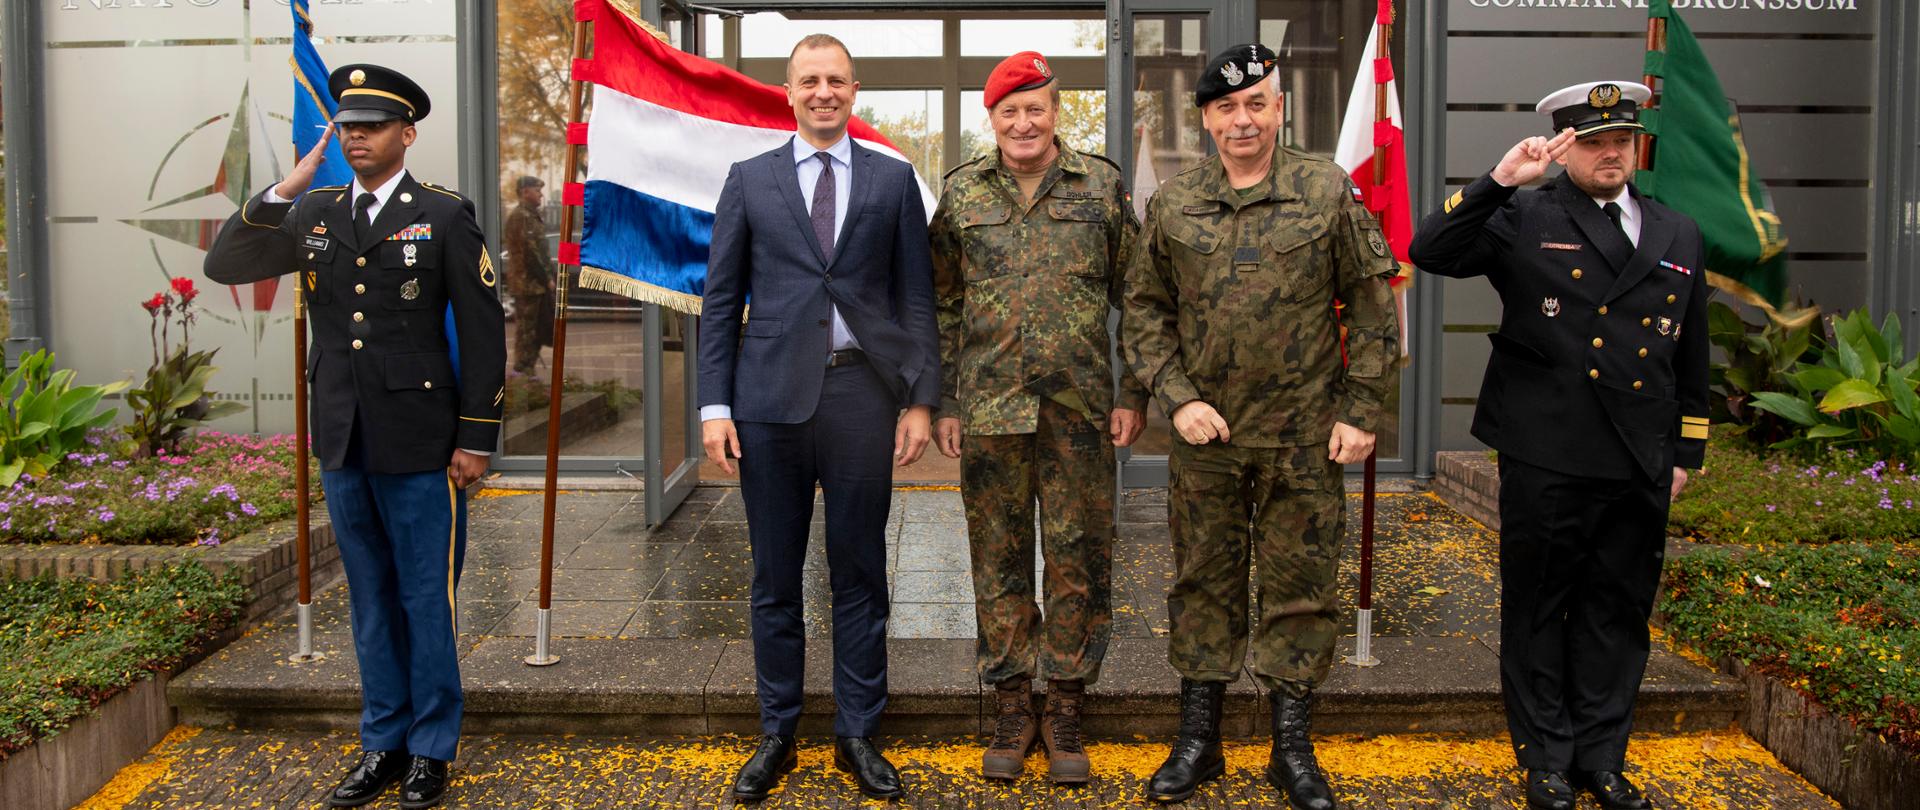 Visit of Ambassador Tomasz Szatkowski in the Allied Joint Force Command in Brunssum